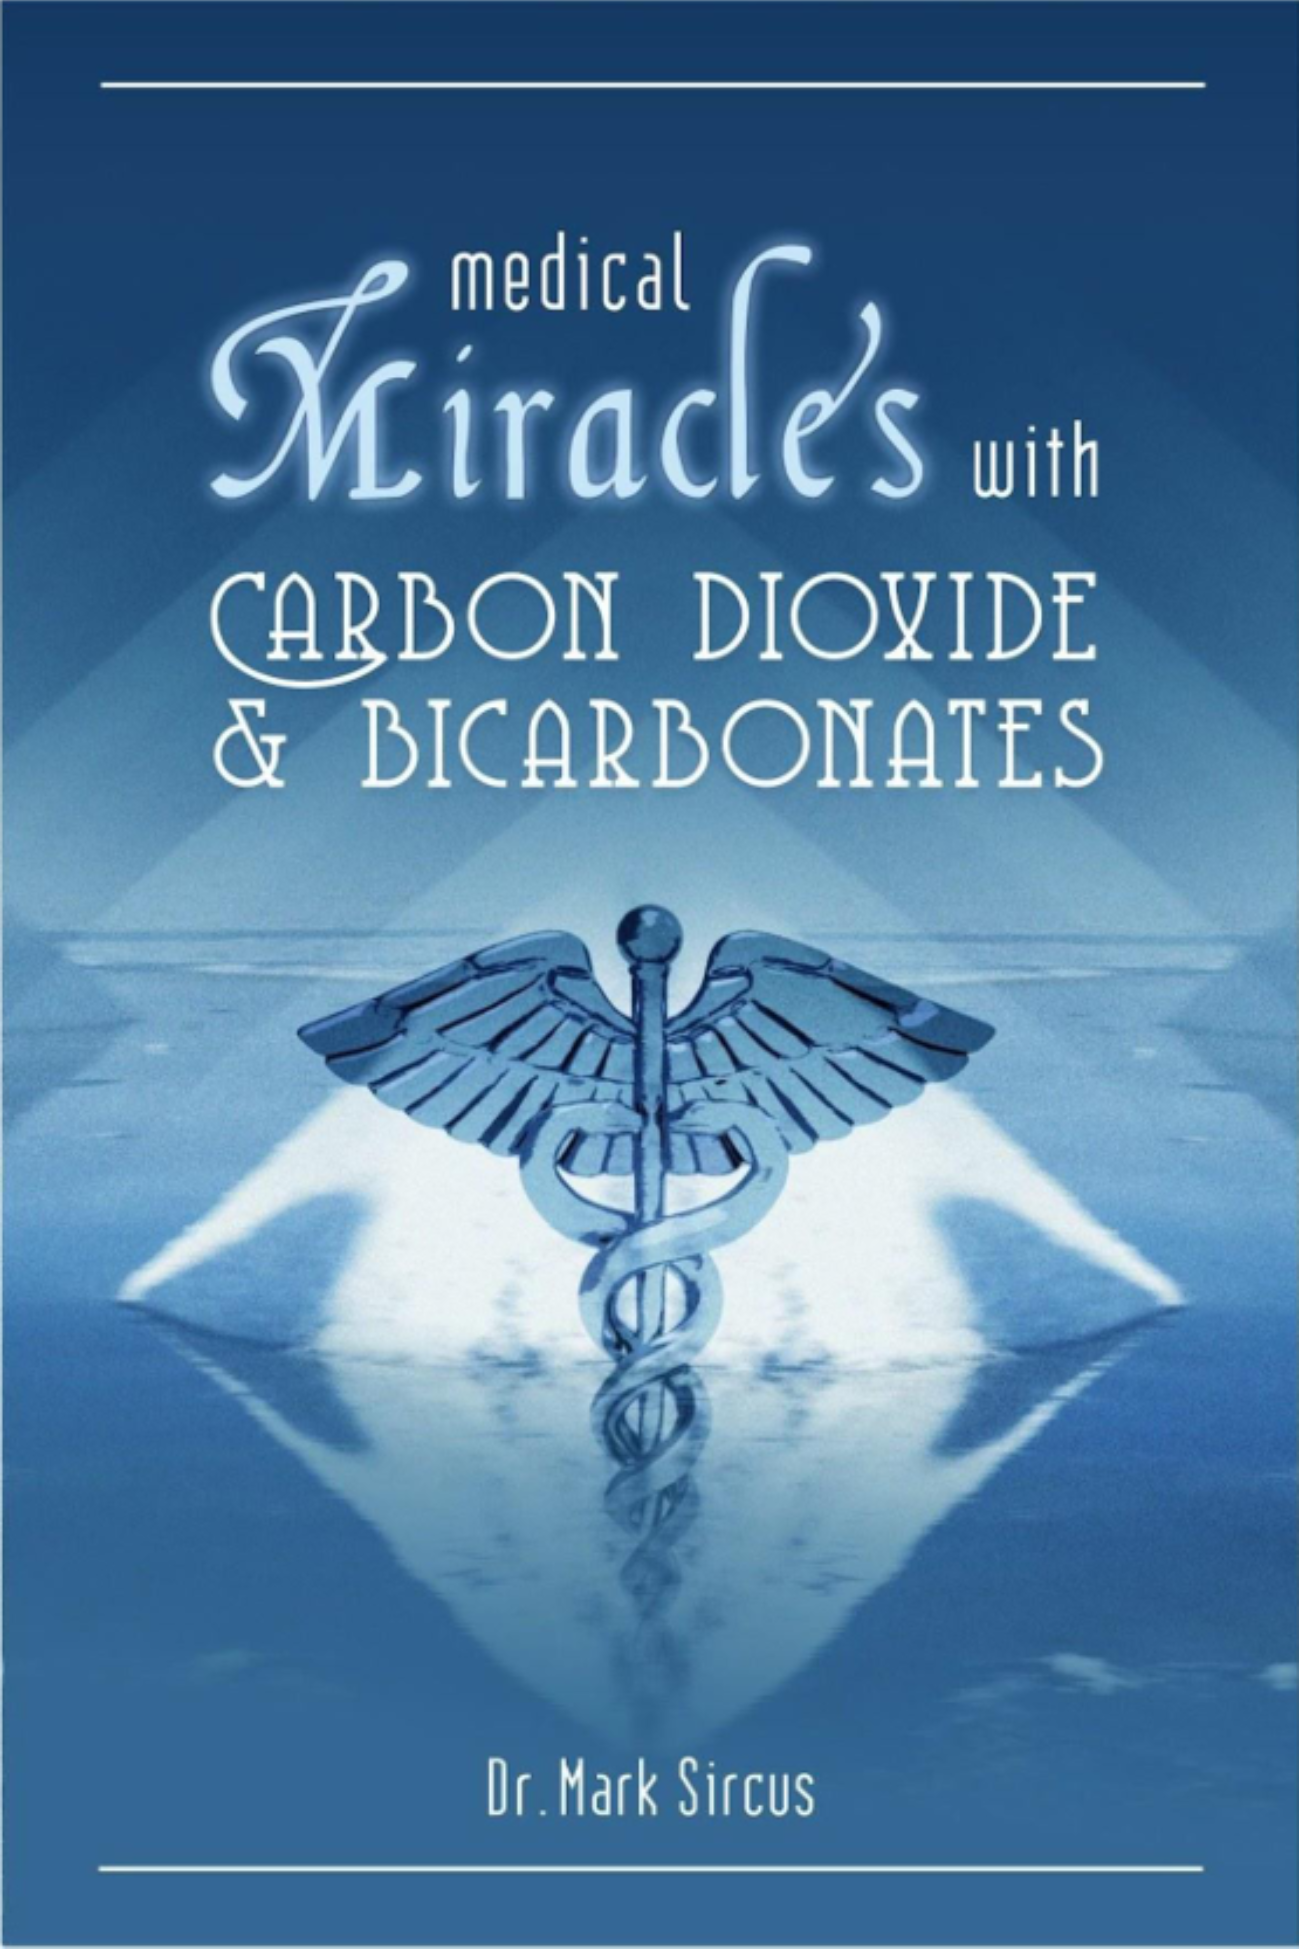 Medical Miracles's with Carbon Dioxide & Bicarbonates book image